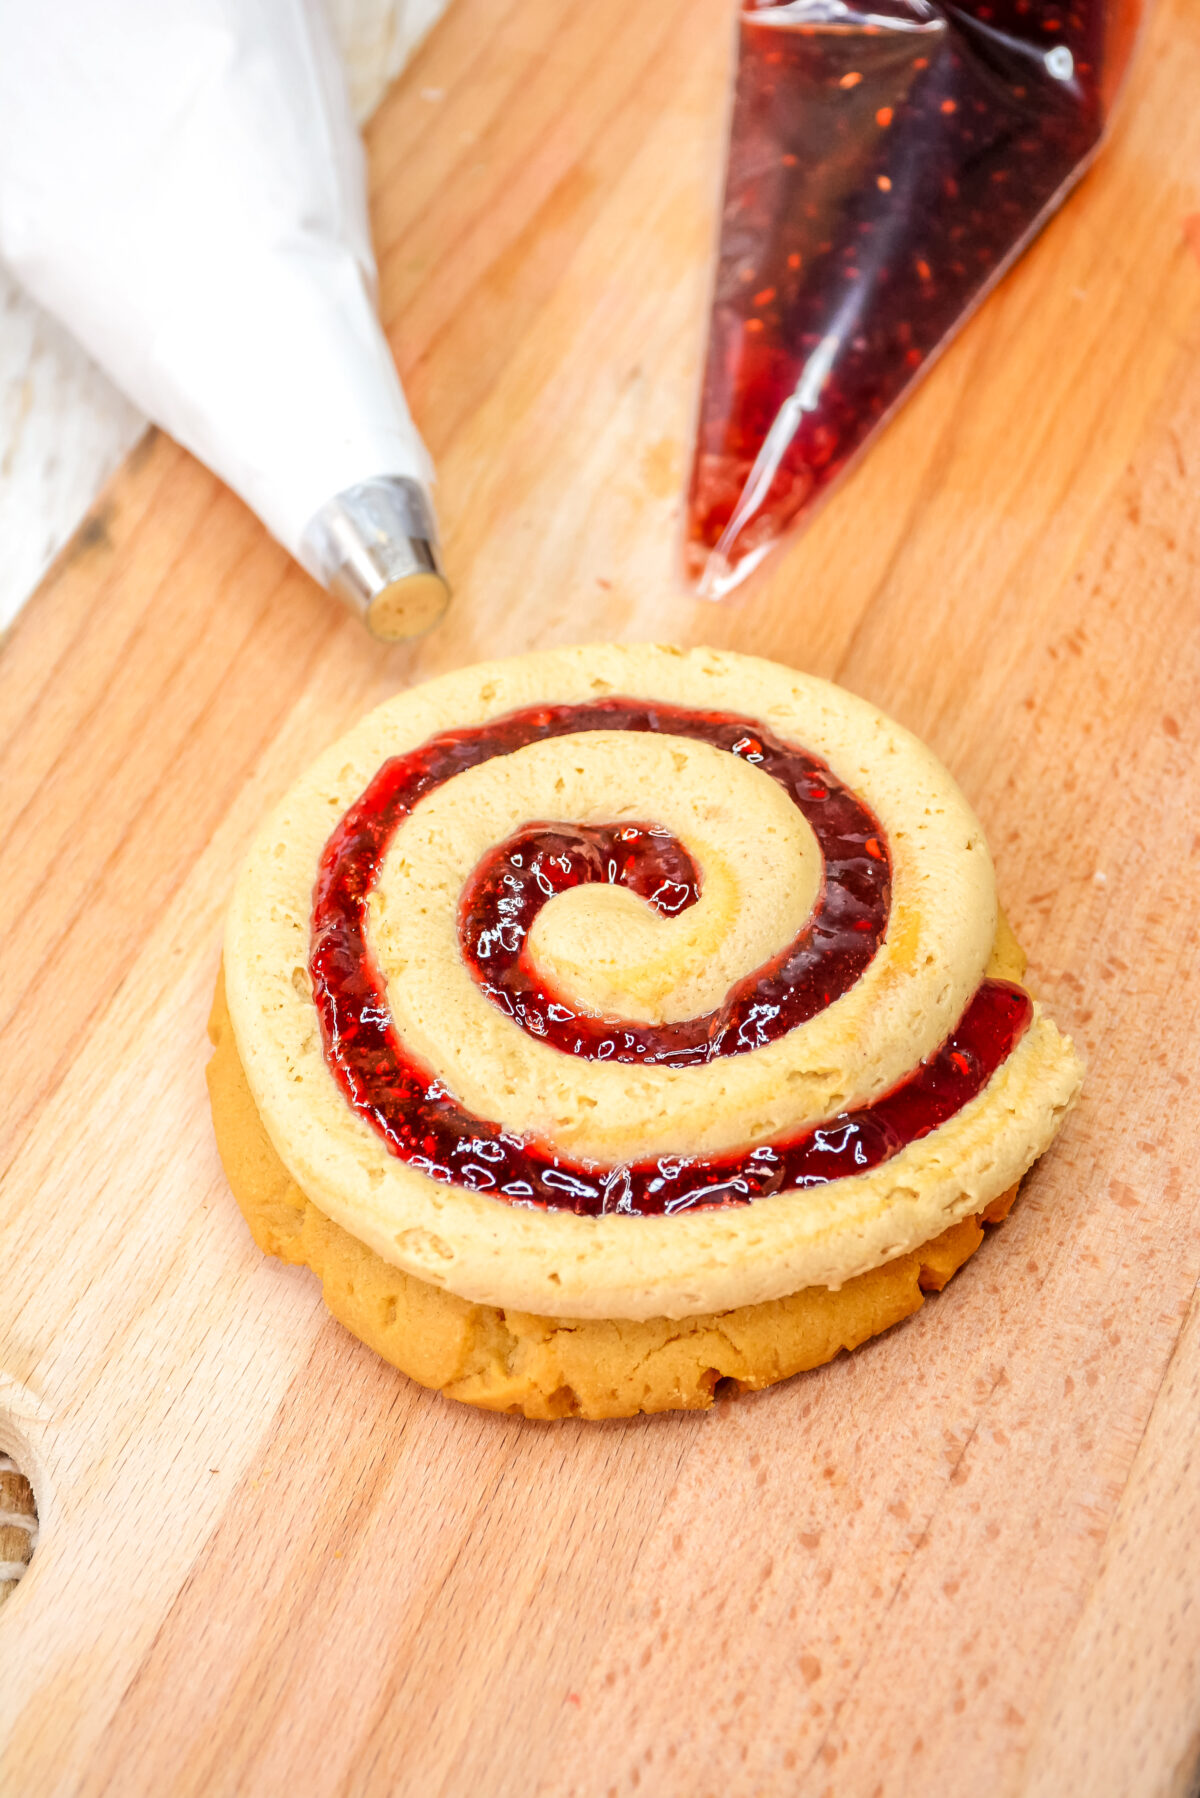 A spiral of jam piped on the peanut butter cookie.